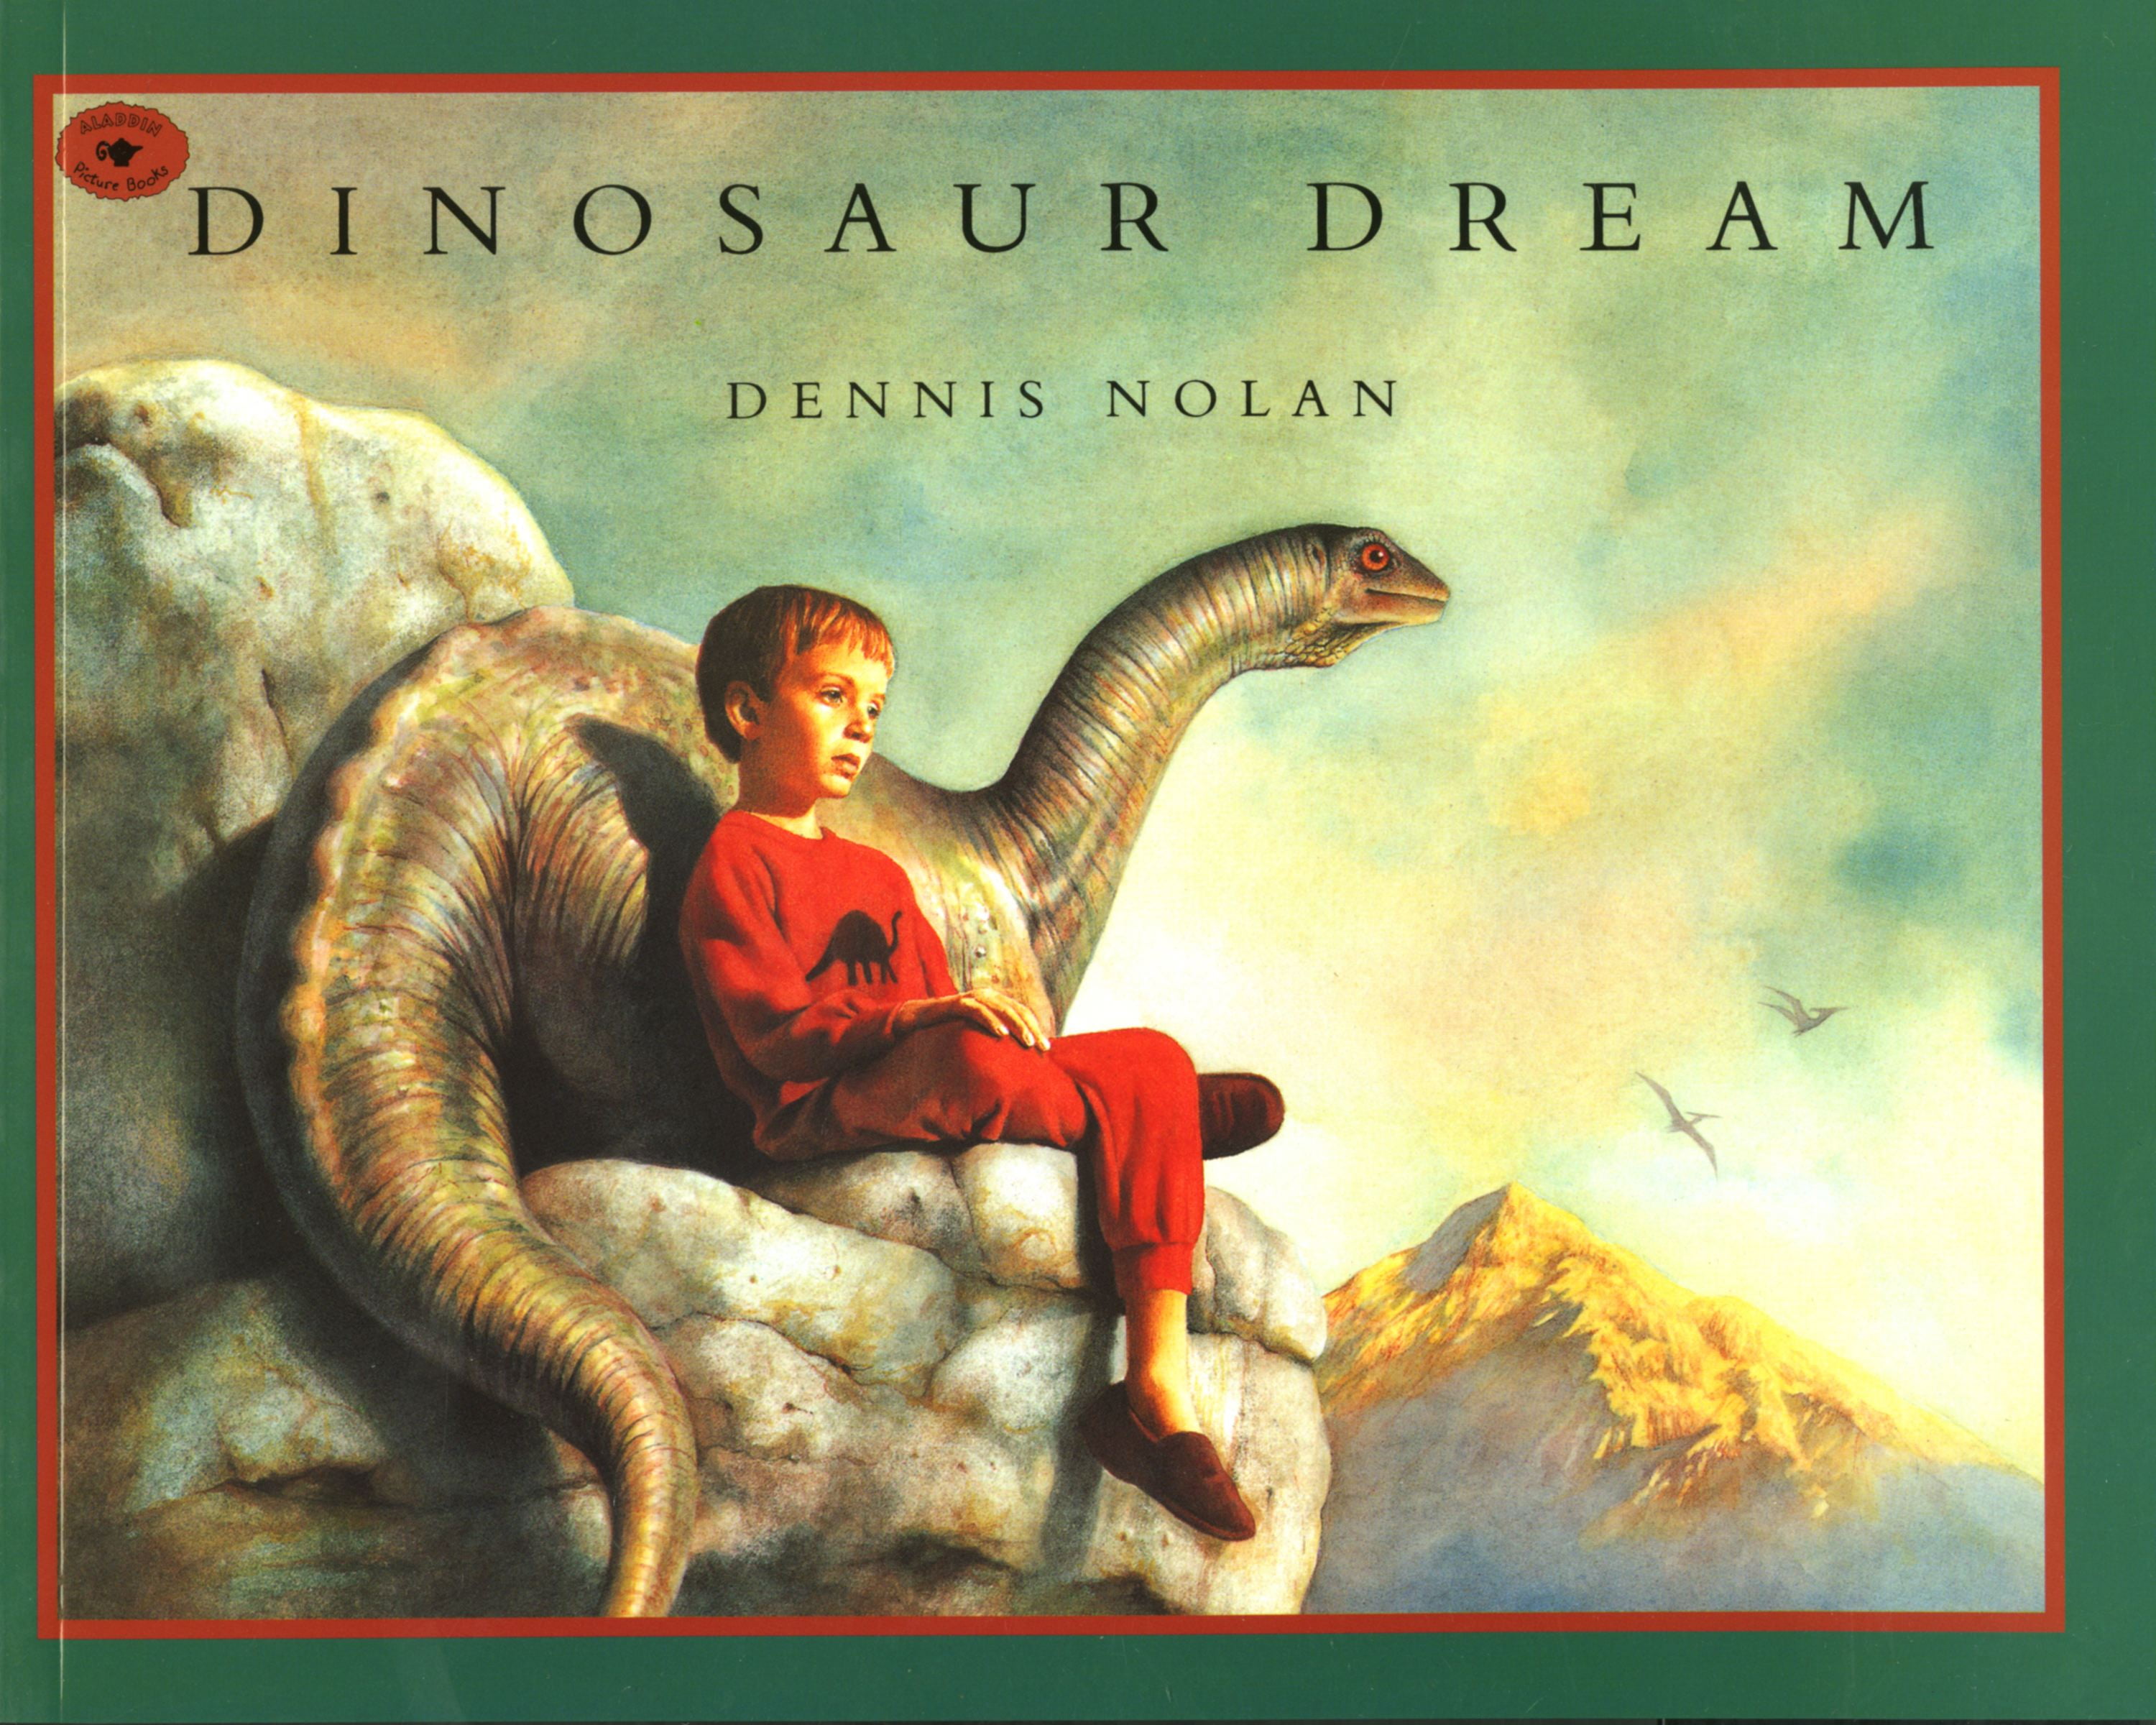 dreams about dinosaurs